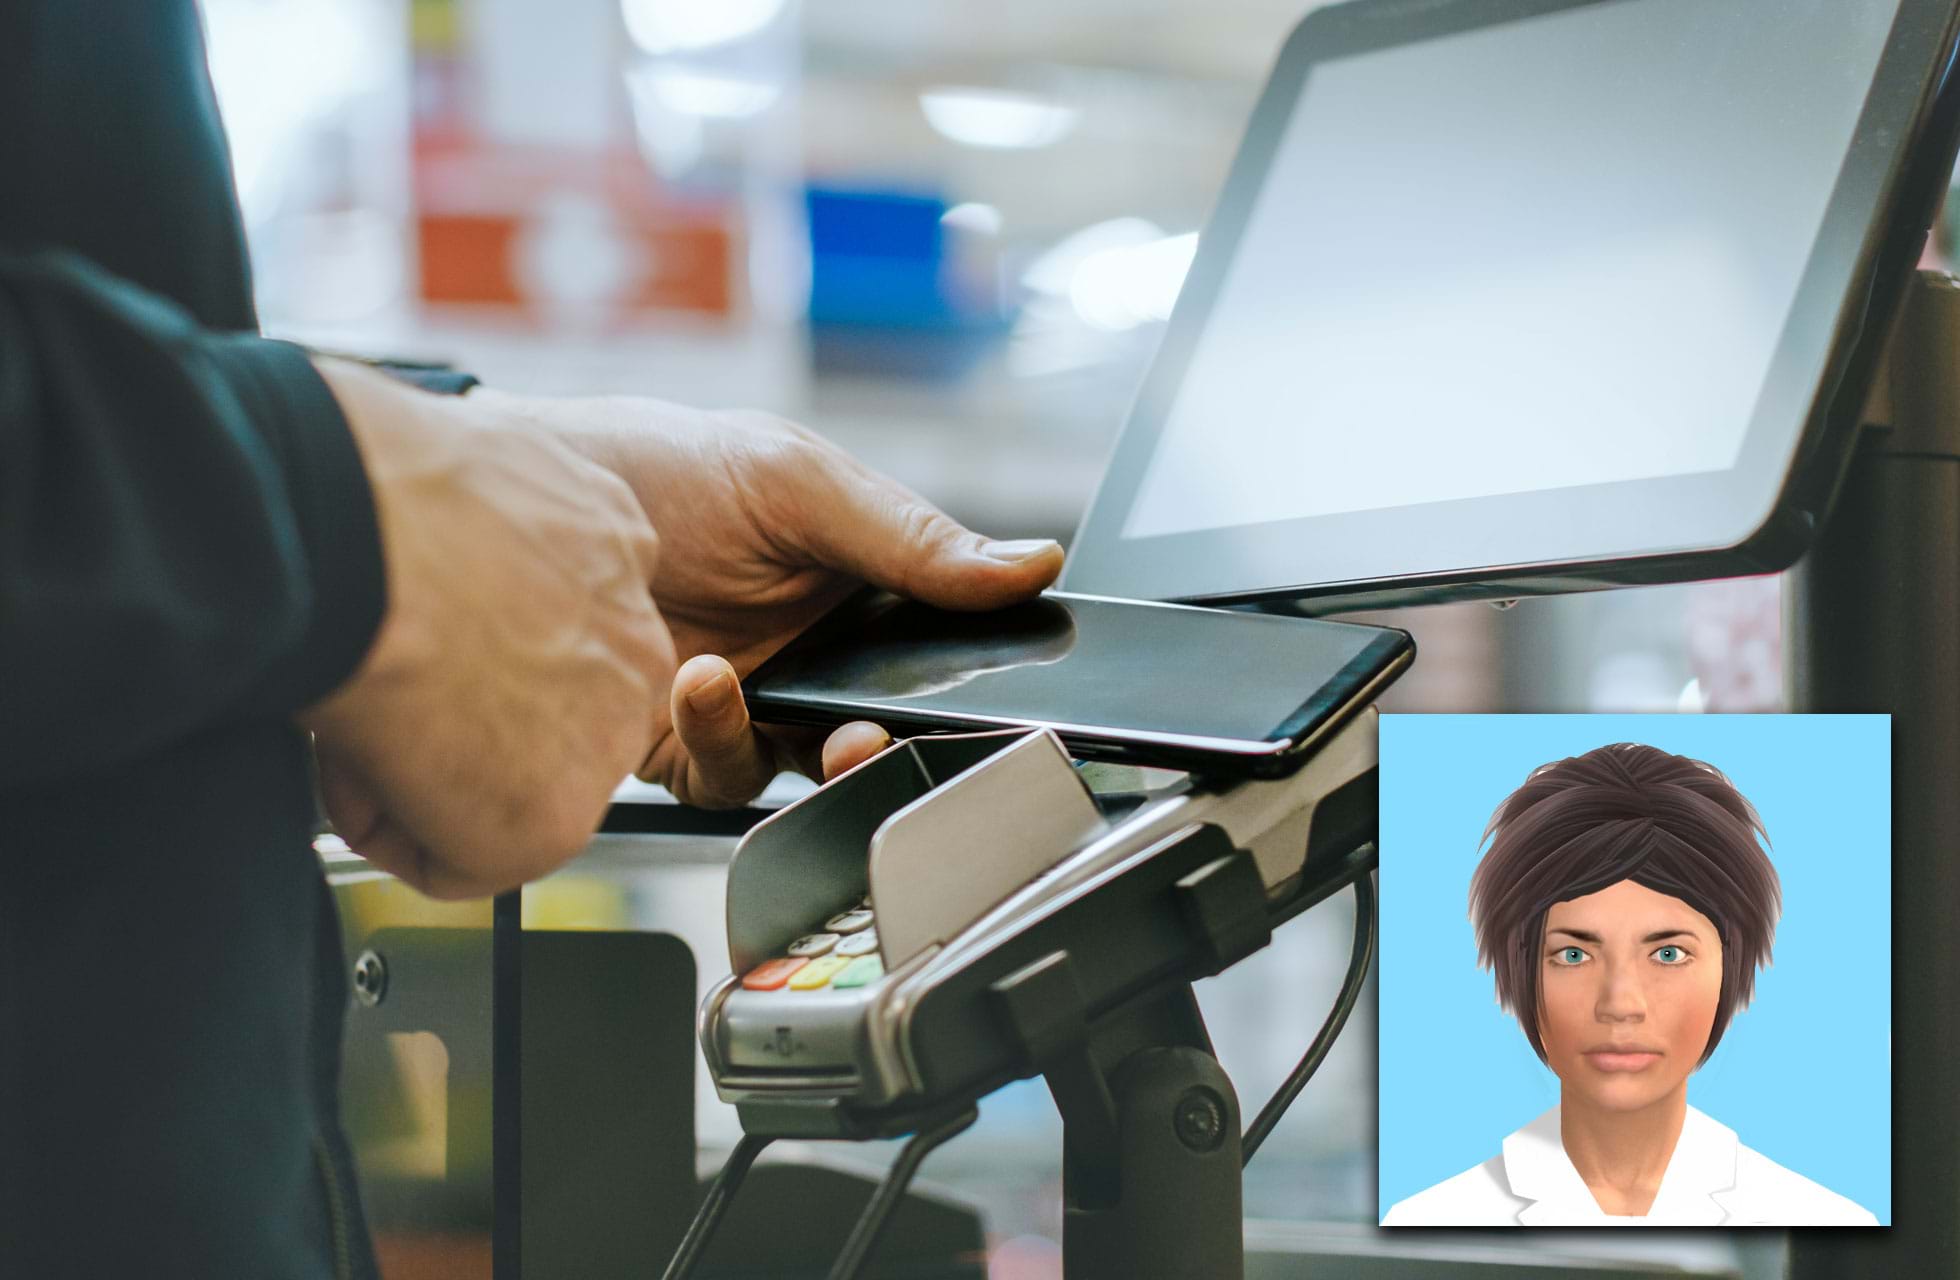 A picture of a self-scan checkout, with a digitised face 